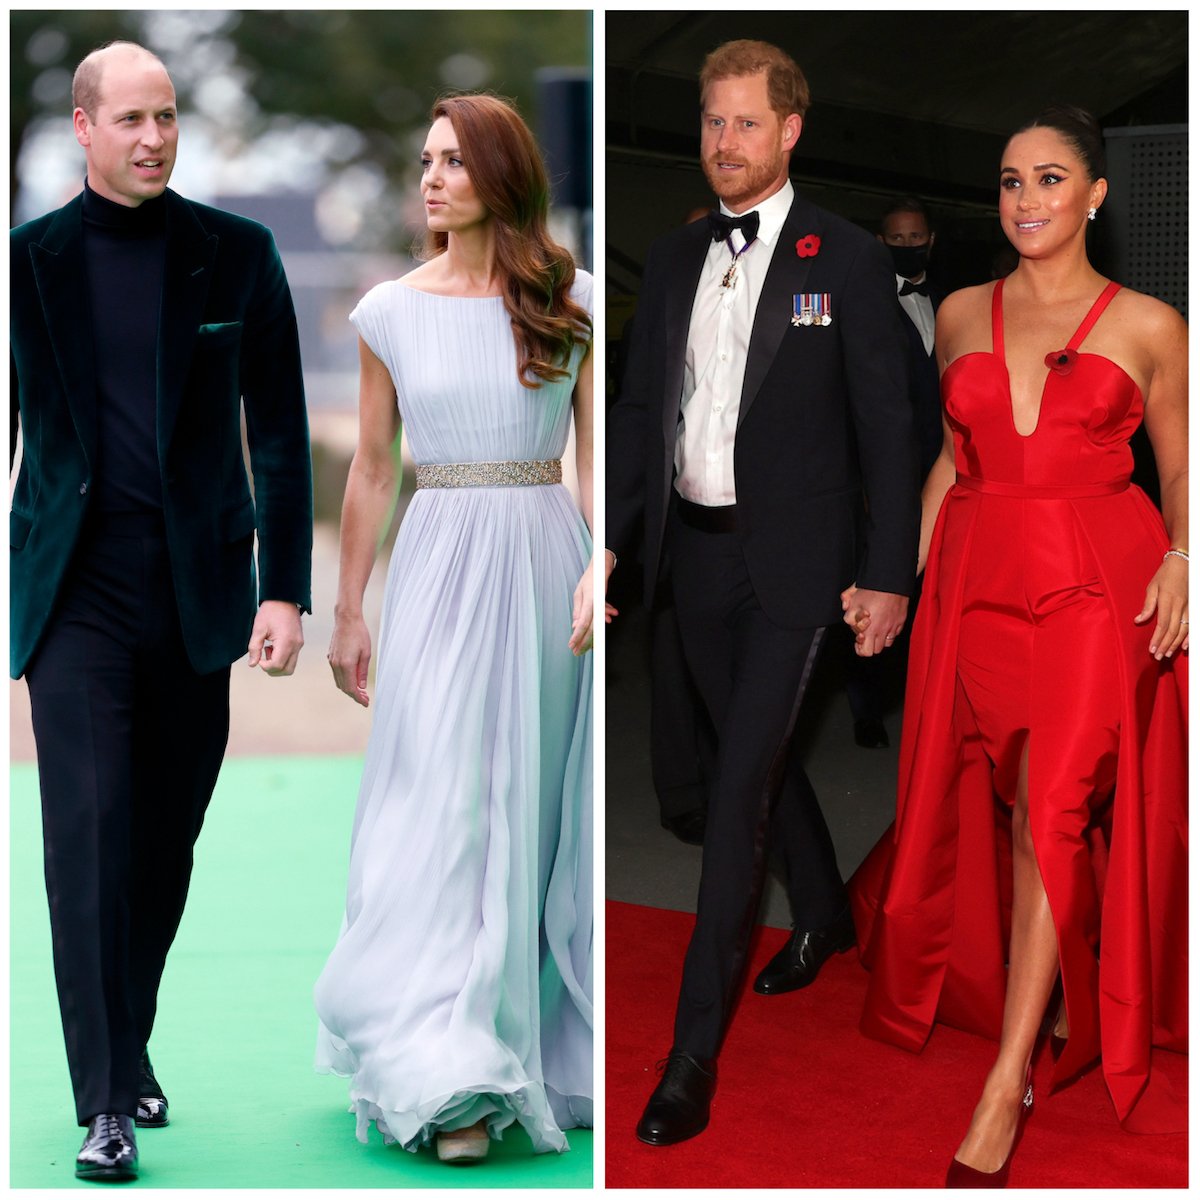 Prince William and Kate Middleton in 2021 at the Earthshot Prize Awards; Prince Harry and Meghan Markle at the 2021 Salute to Freedom Gala